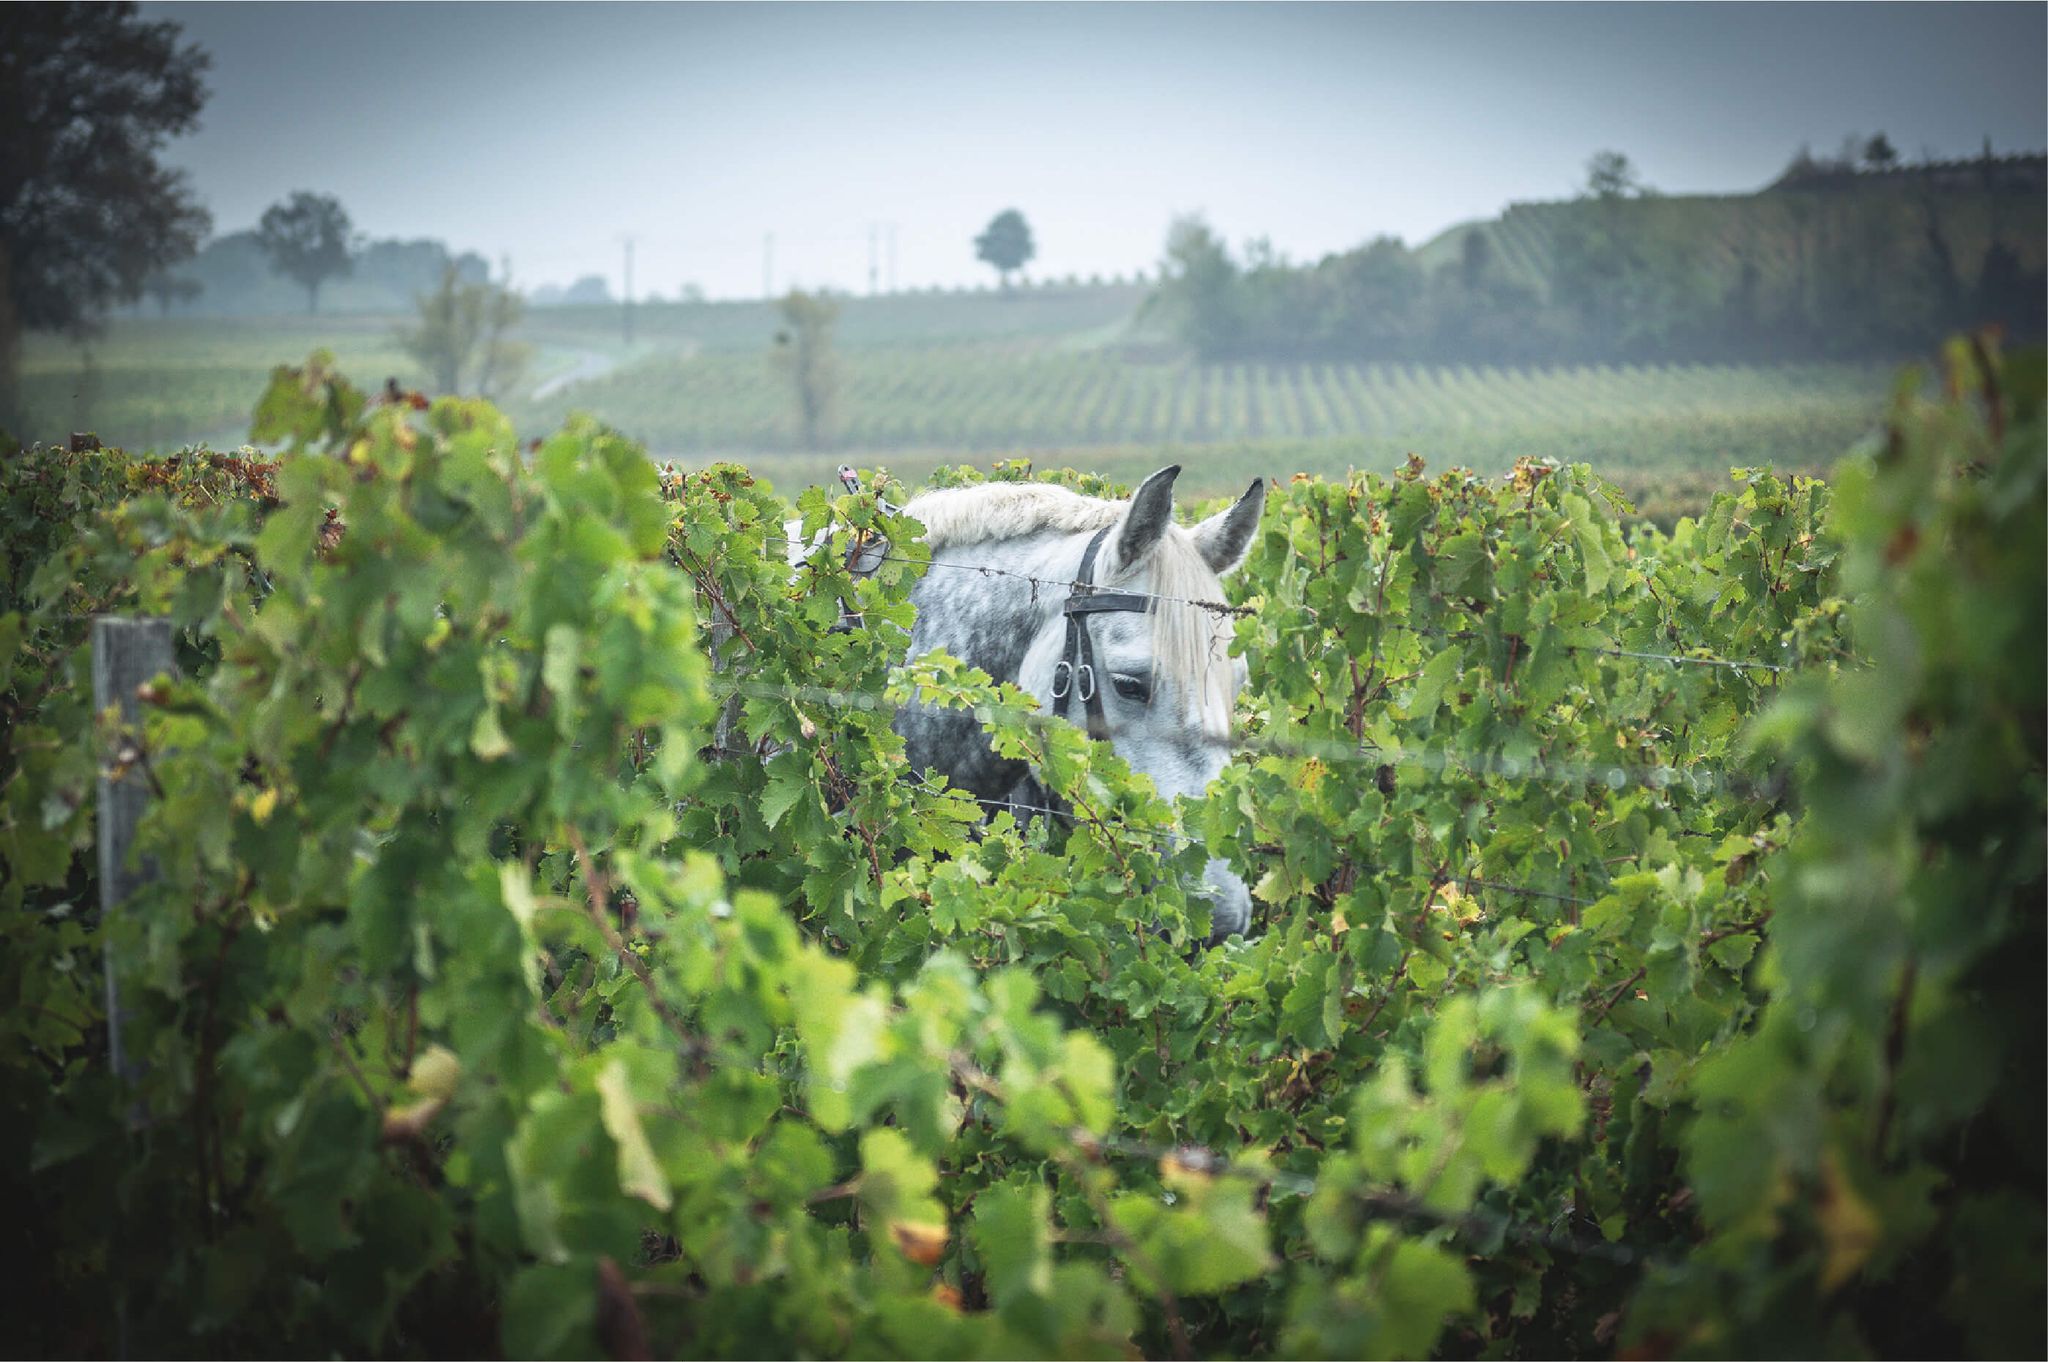 Independent winegrower Bordeaux - Domaine Jean Christophe Coubris